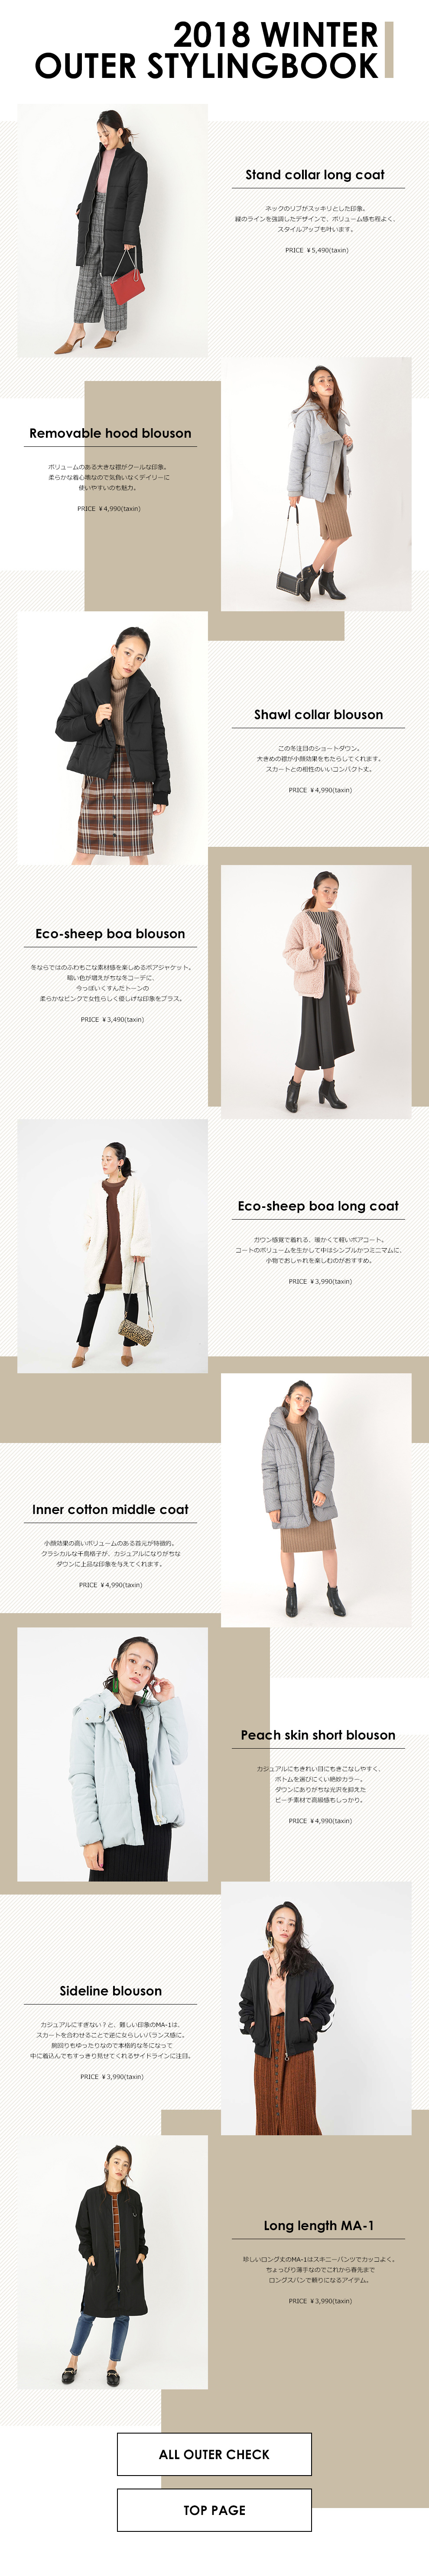 2018 WINTER OUTER STYLINGBOOK